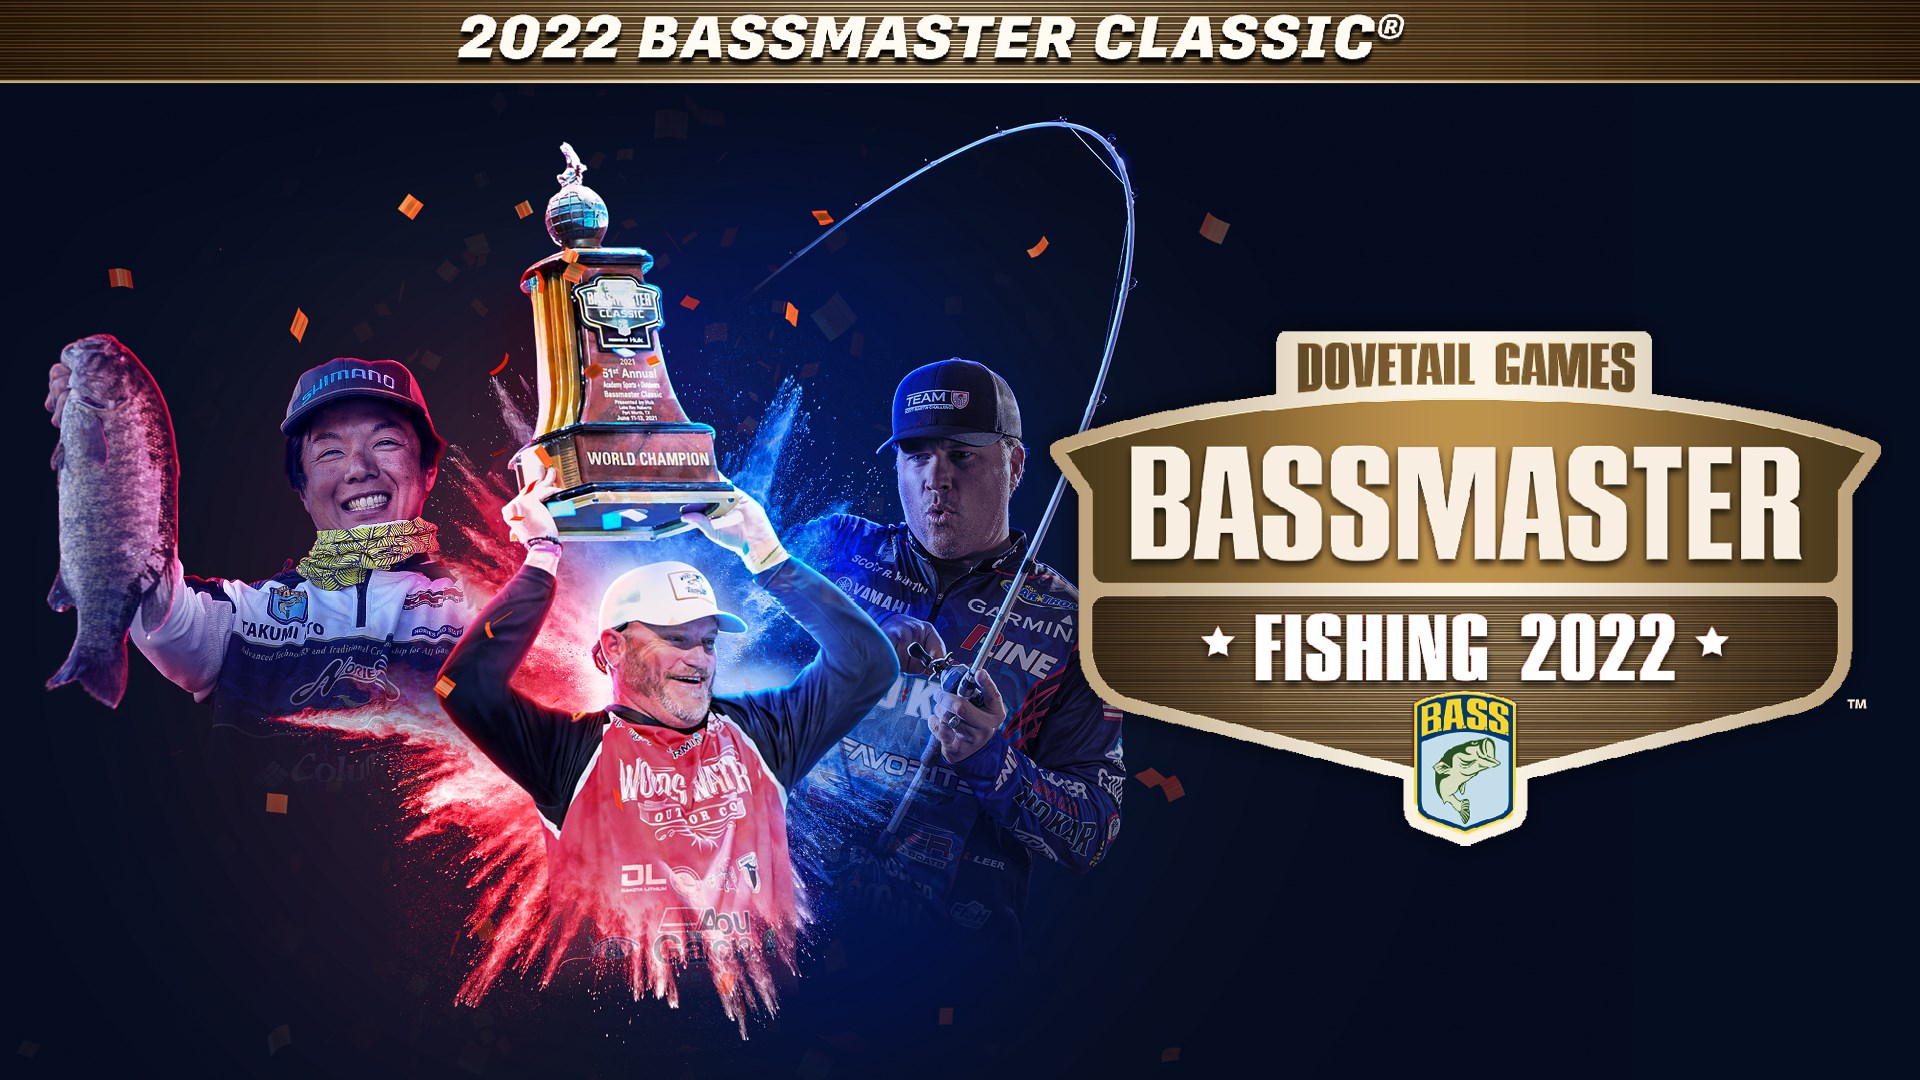 Bassmaster Fishing 2022: 2022 Bassmaster Classic Is Now Available For PC,  Xbox One, And Xbox Series X